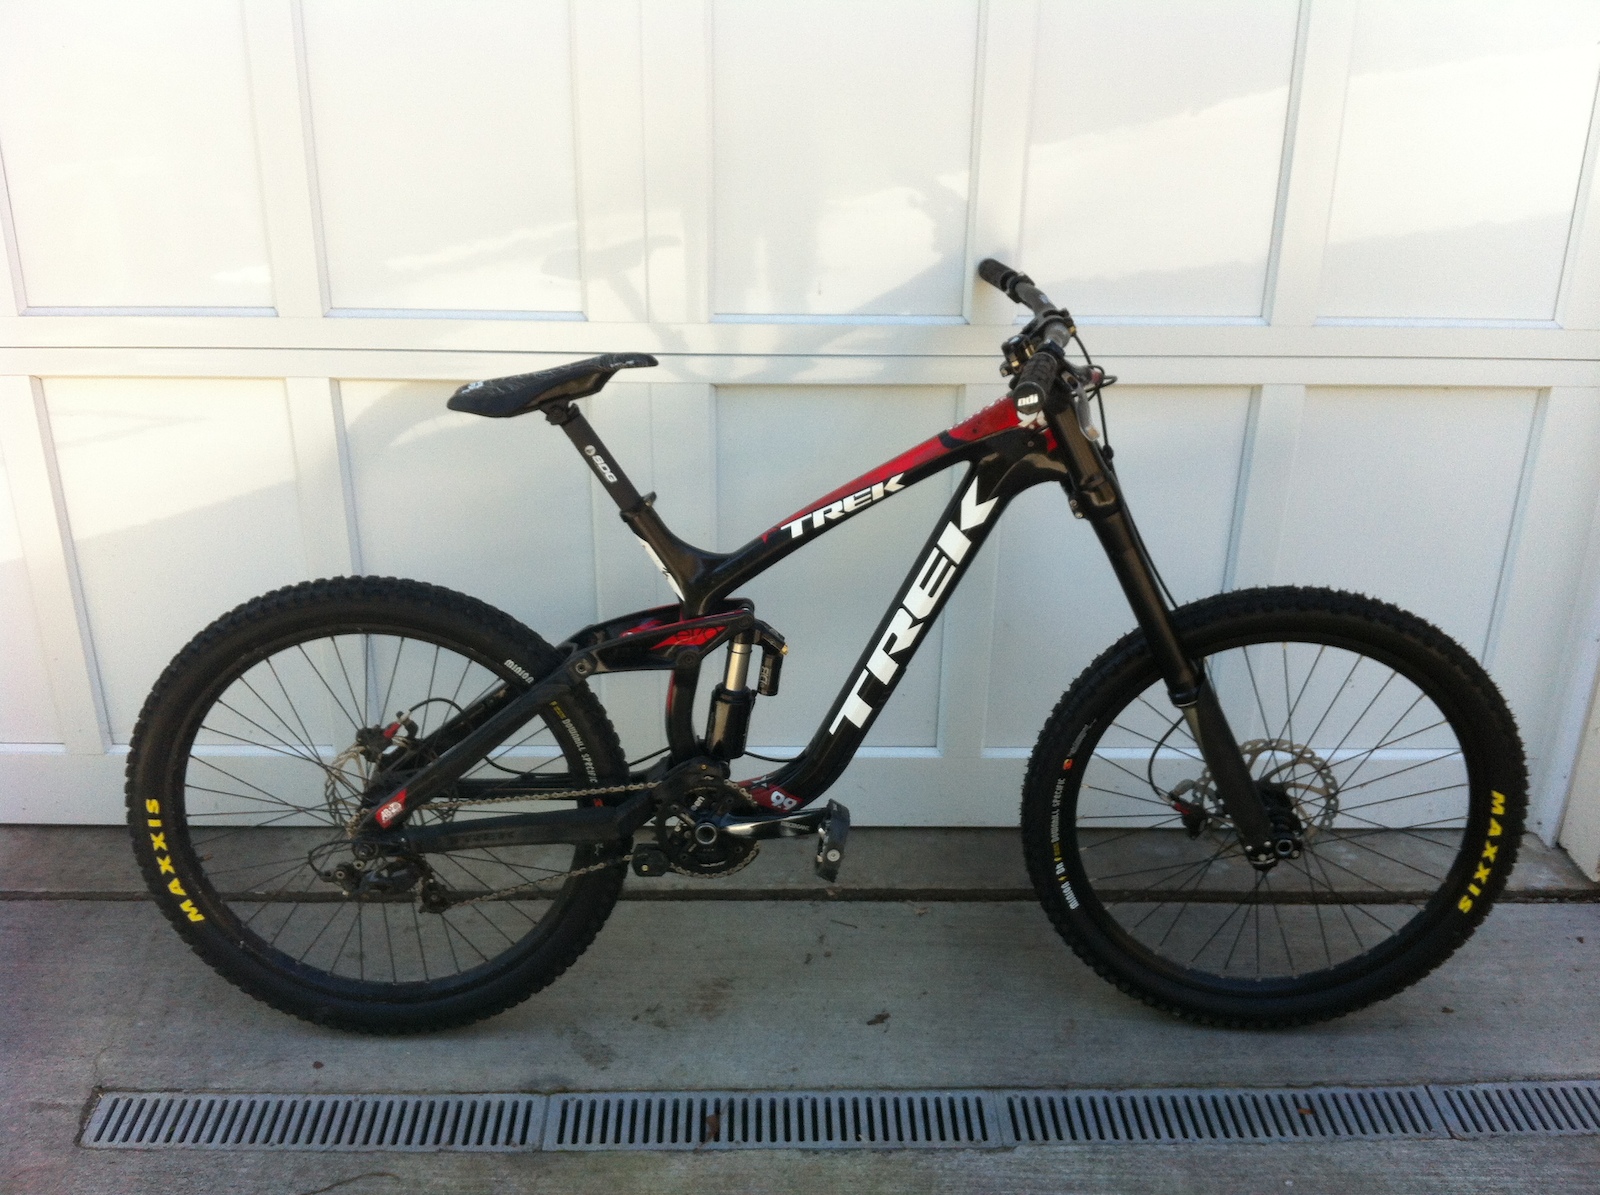 New atlas I beam saddle, SDG carbon post and deity blacklabel bars on the session 9.9